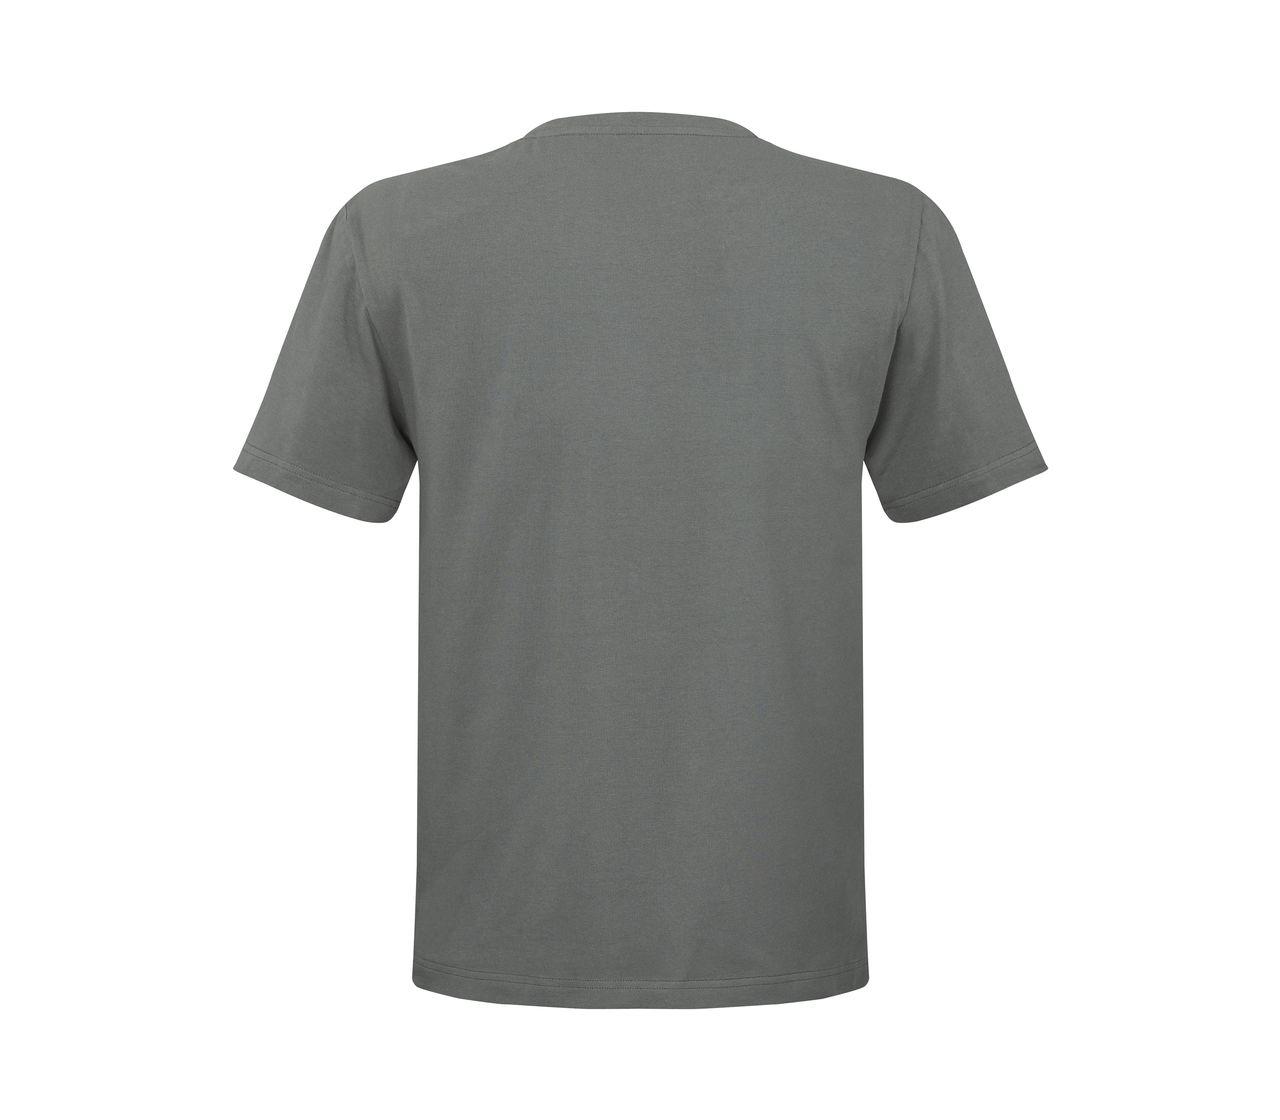 Victorinox Graphic Tee in M - 611788